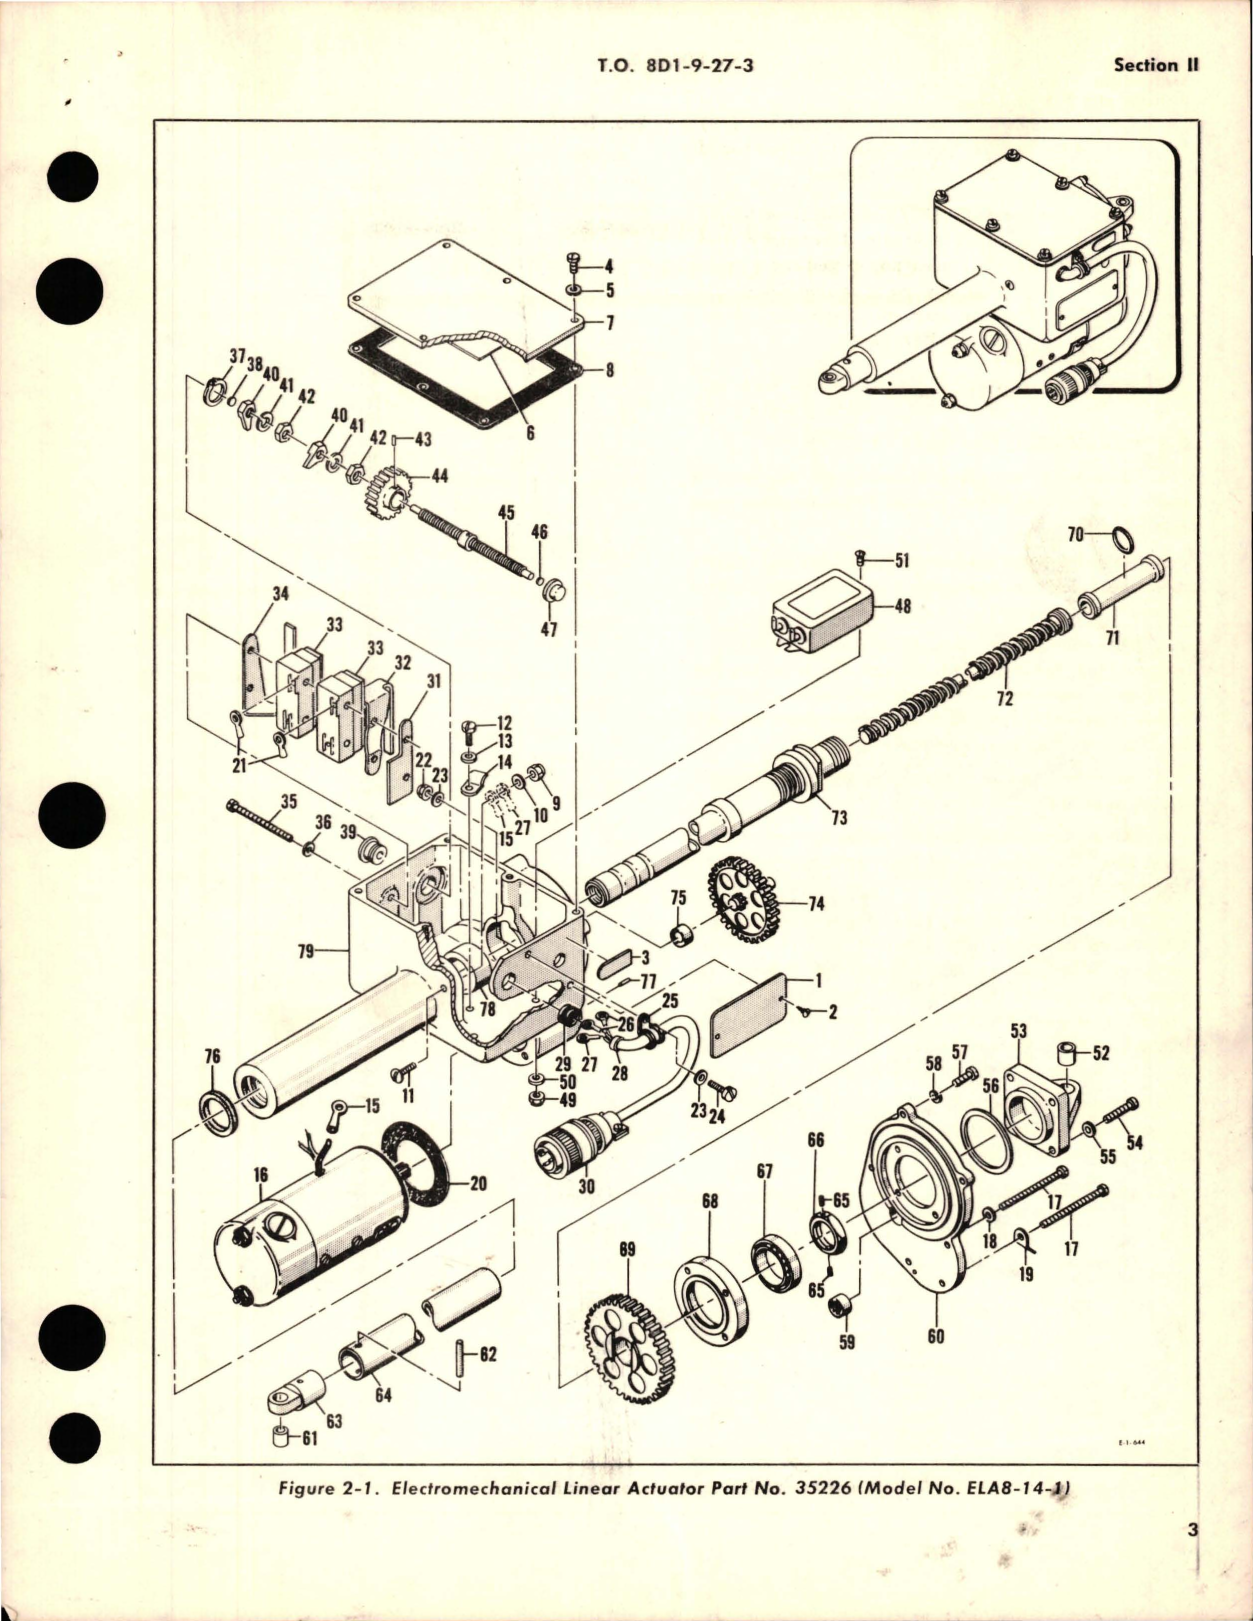 Sample page 5 from AirCorps Library document: Overhaul Instructions for Electromechanical Linear Actuator - Part 35226 - Model ELA8-14